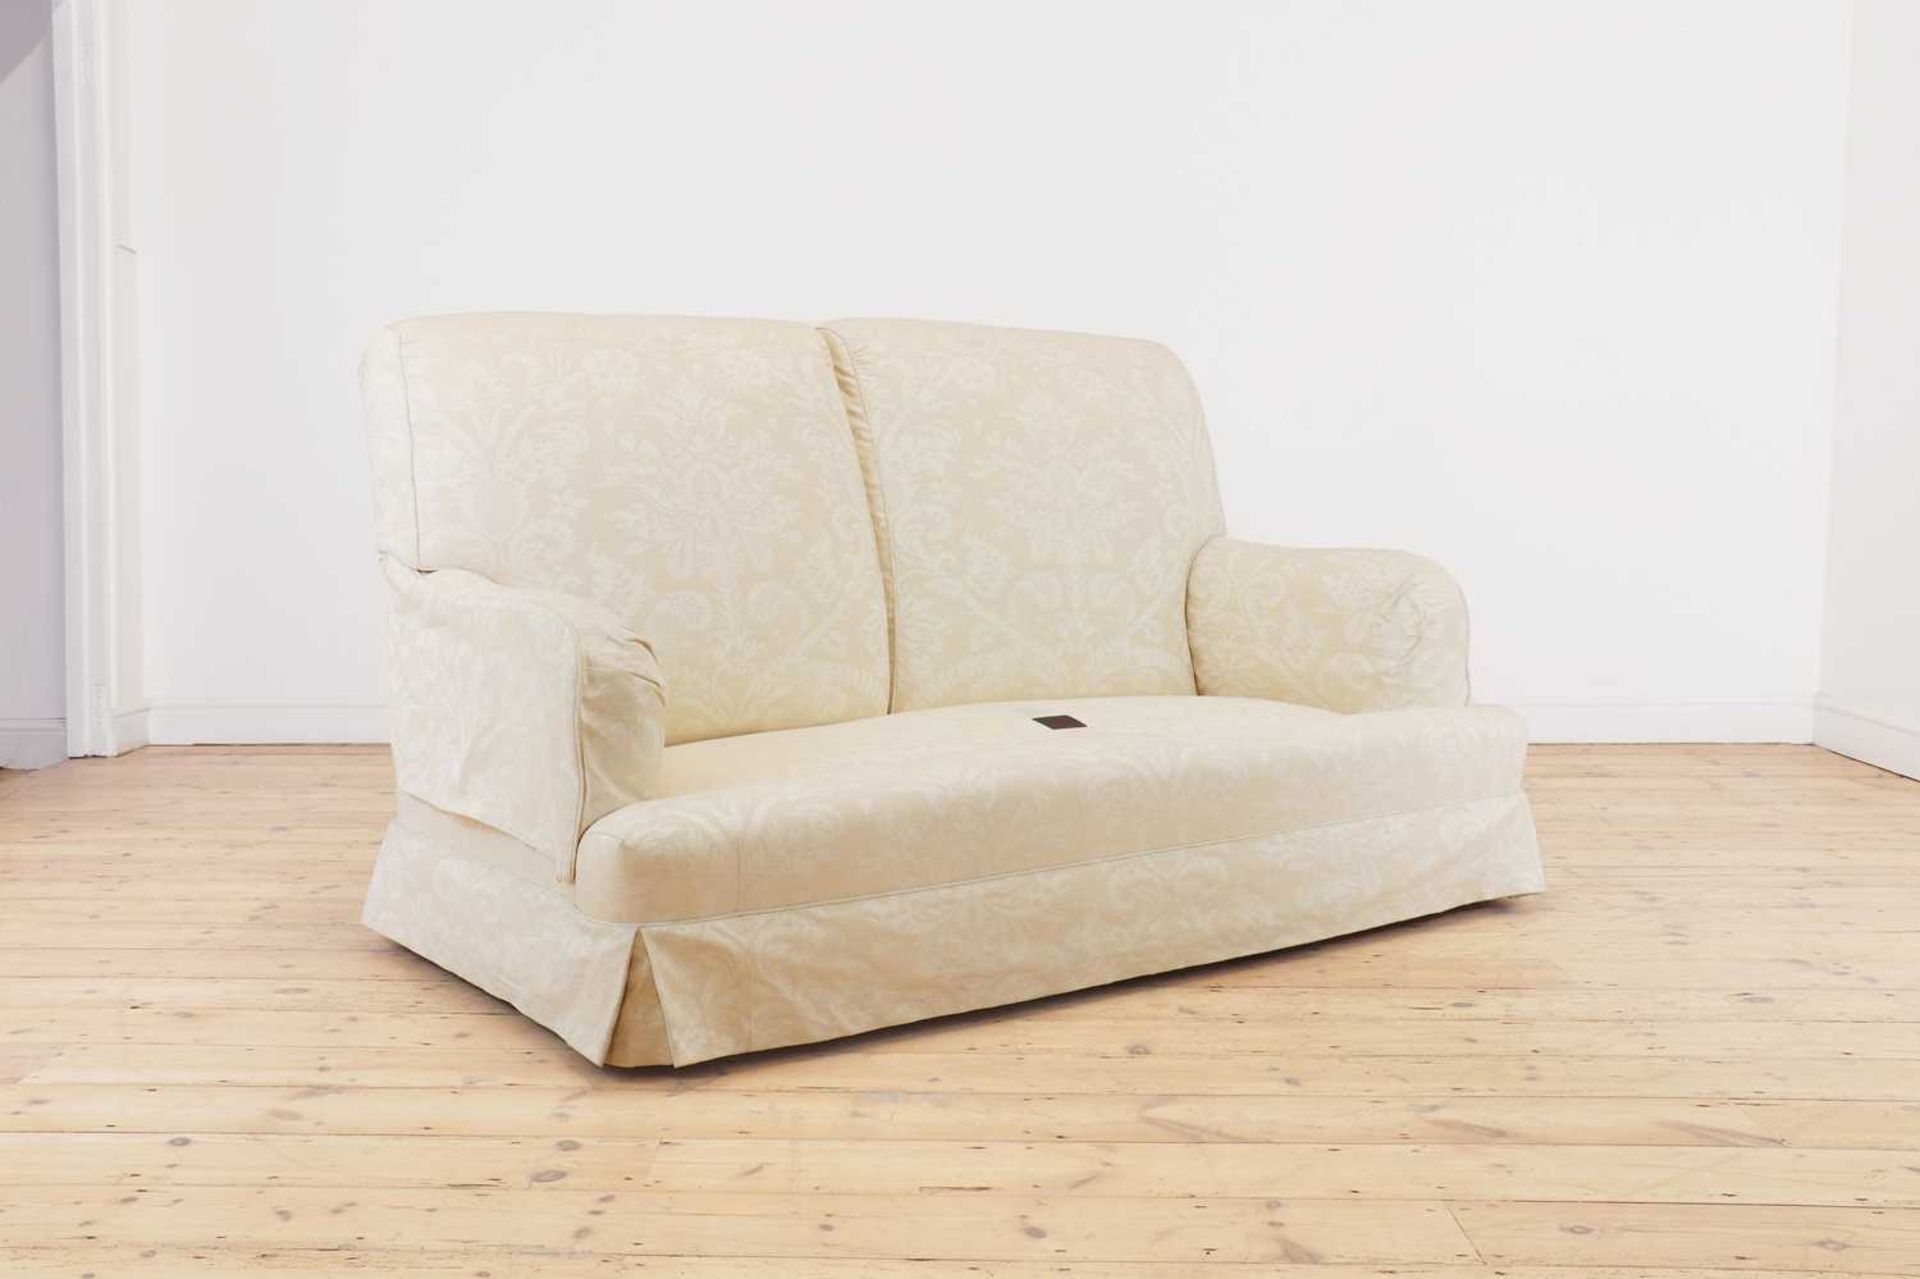 A two-seat 'Connaught' sofa by Peter Dudgeon, London - Image 4 of 15